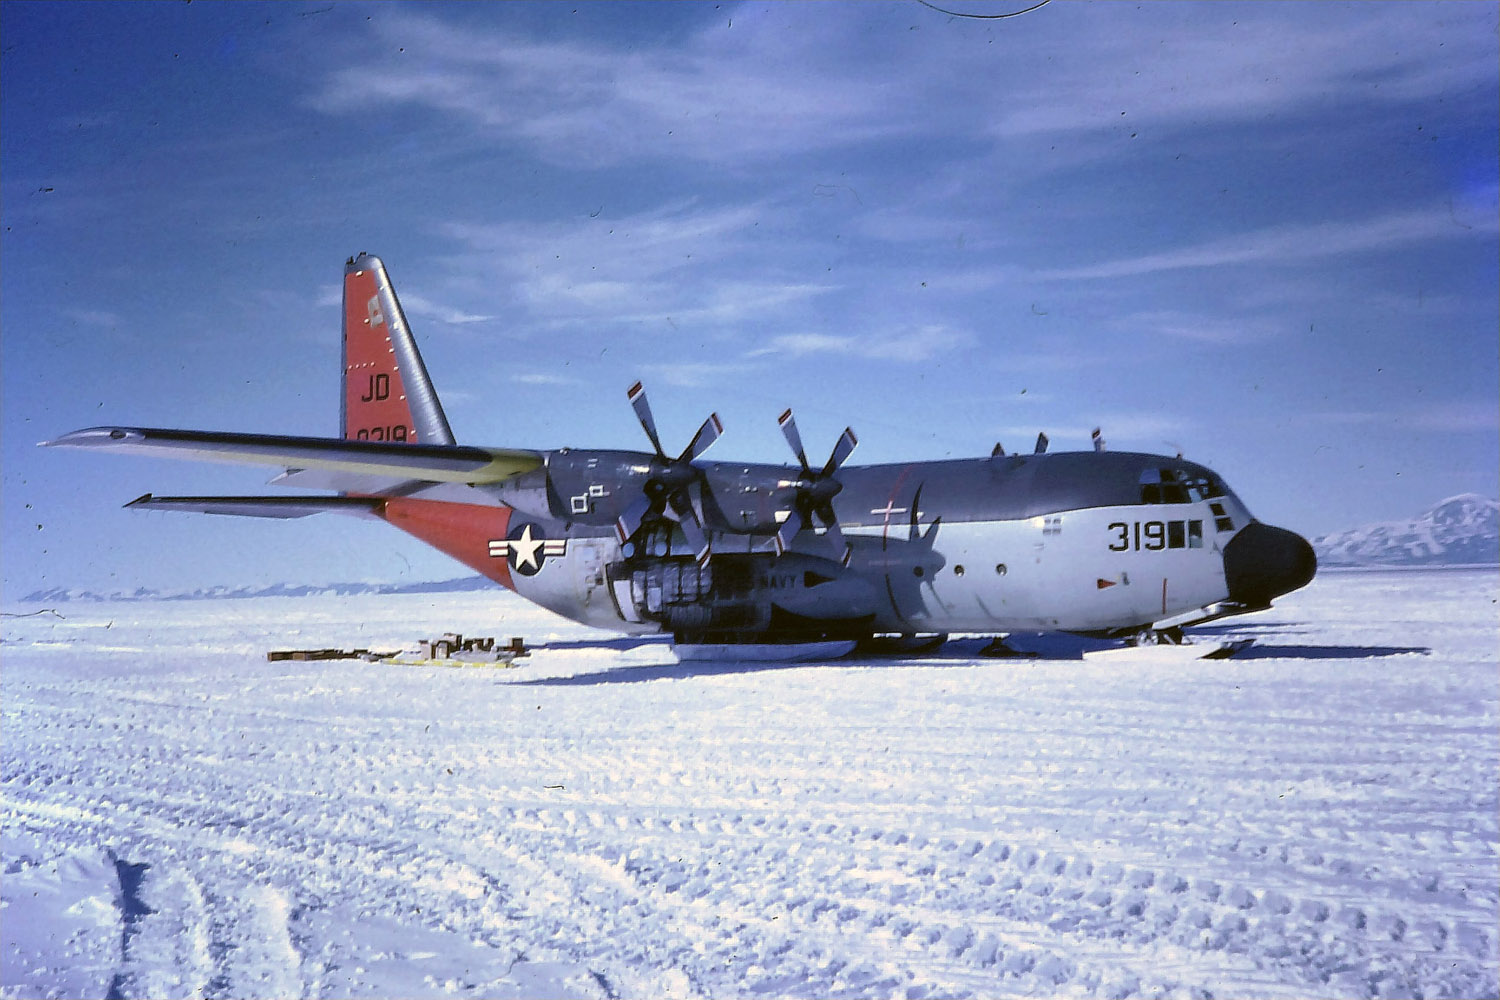 A US Navy ski-equipped Hercules